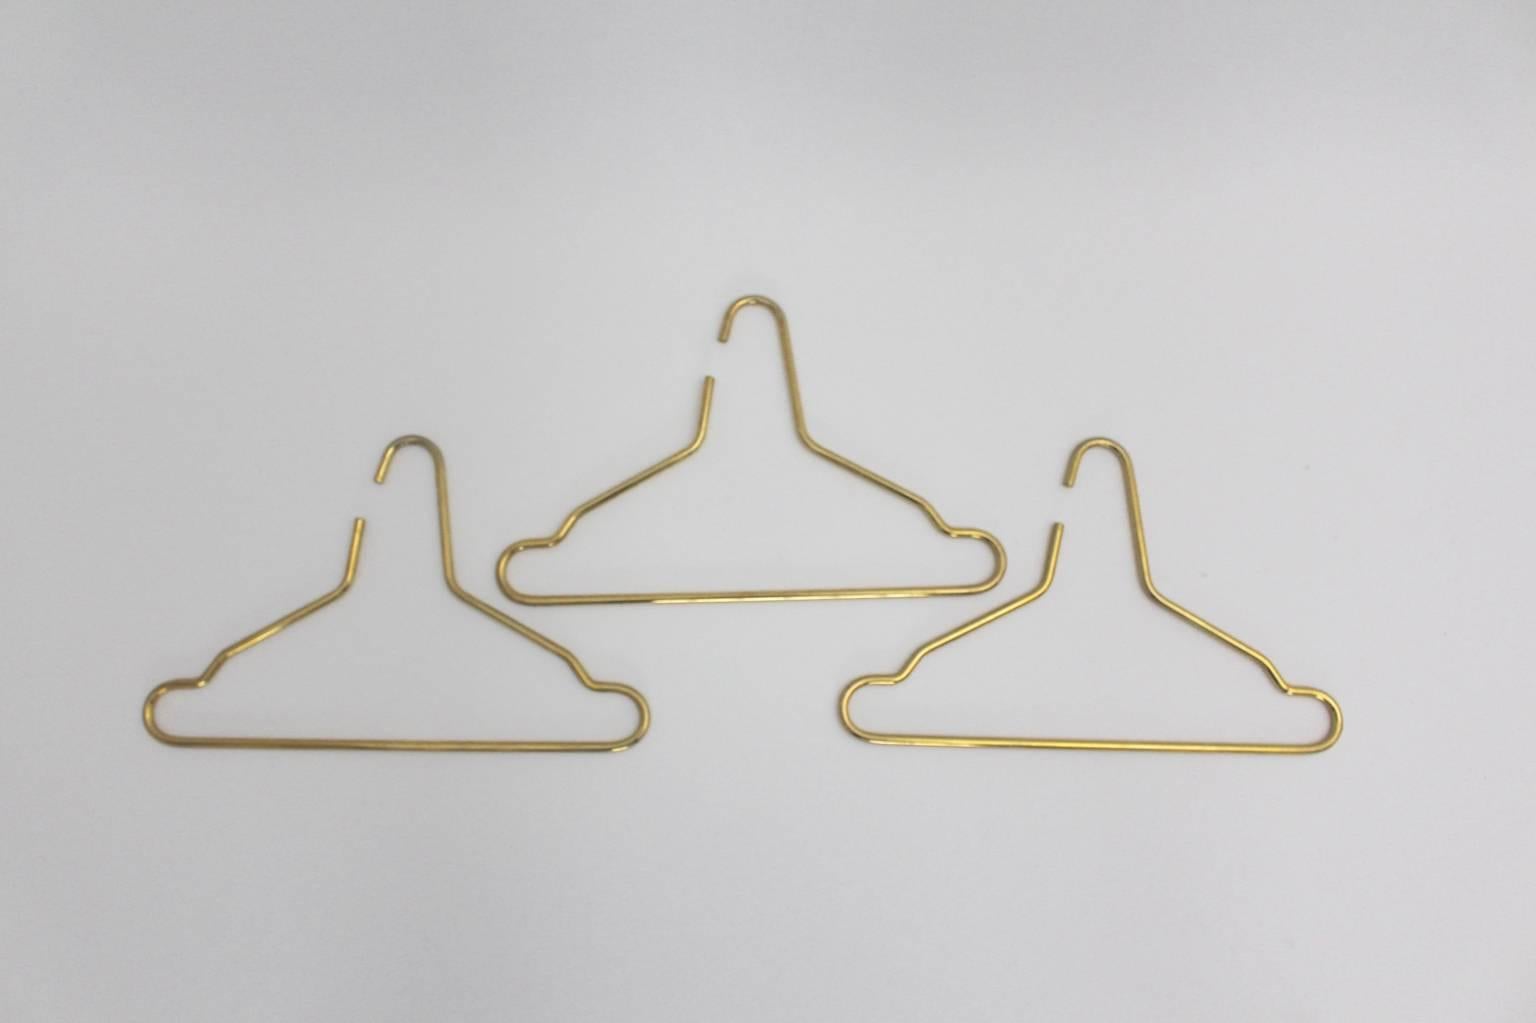 A modern vintage set of three brass hangers, which was designed and manufactured in Austria 1970s.
The brass hanger set is in very good condition with beautiful patina.